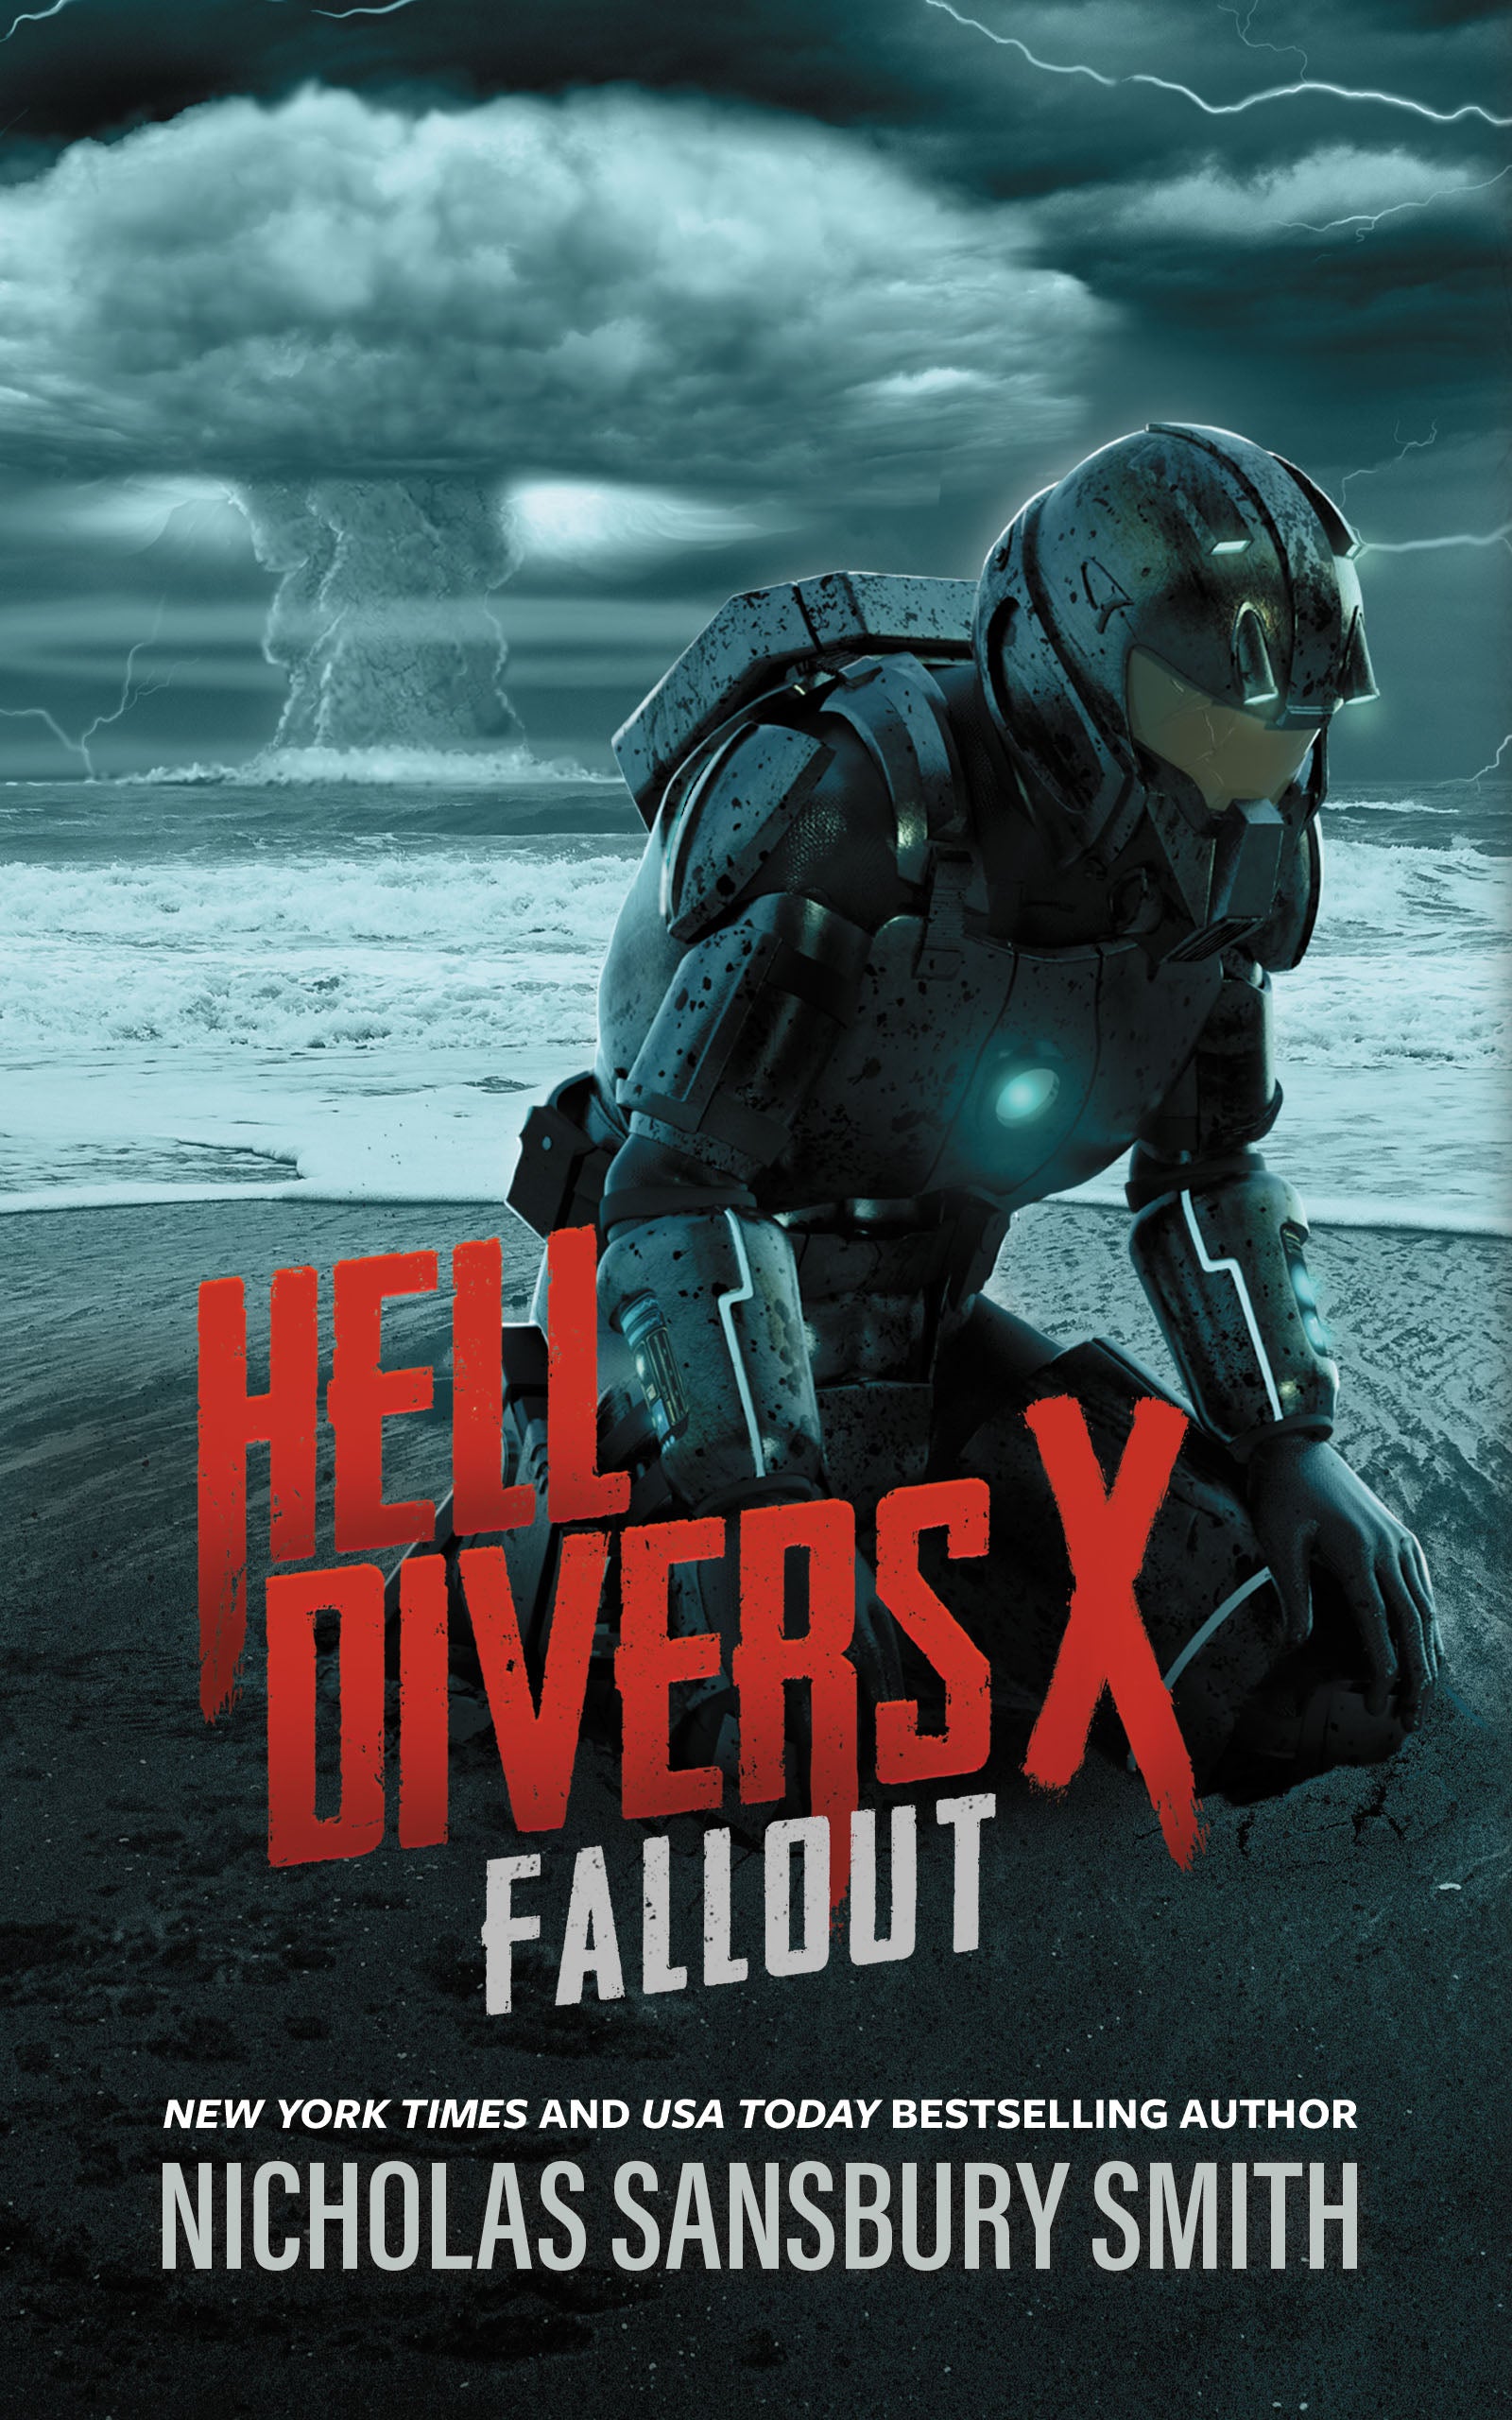 Hell Divers X: Fallout